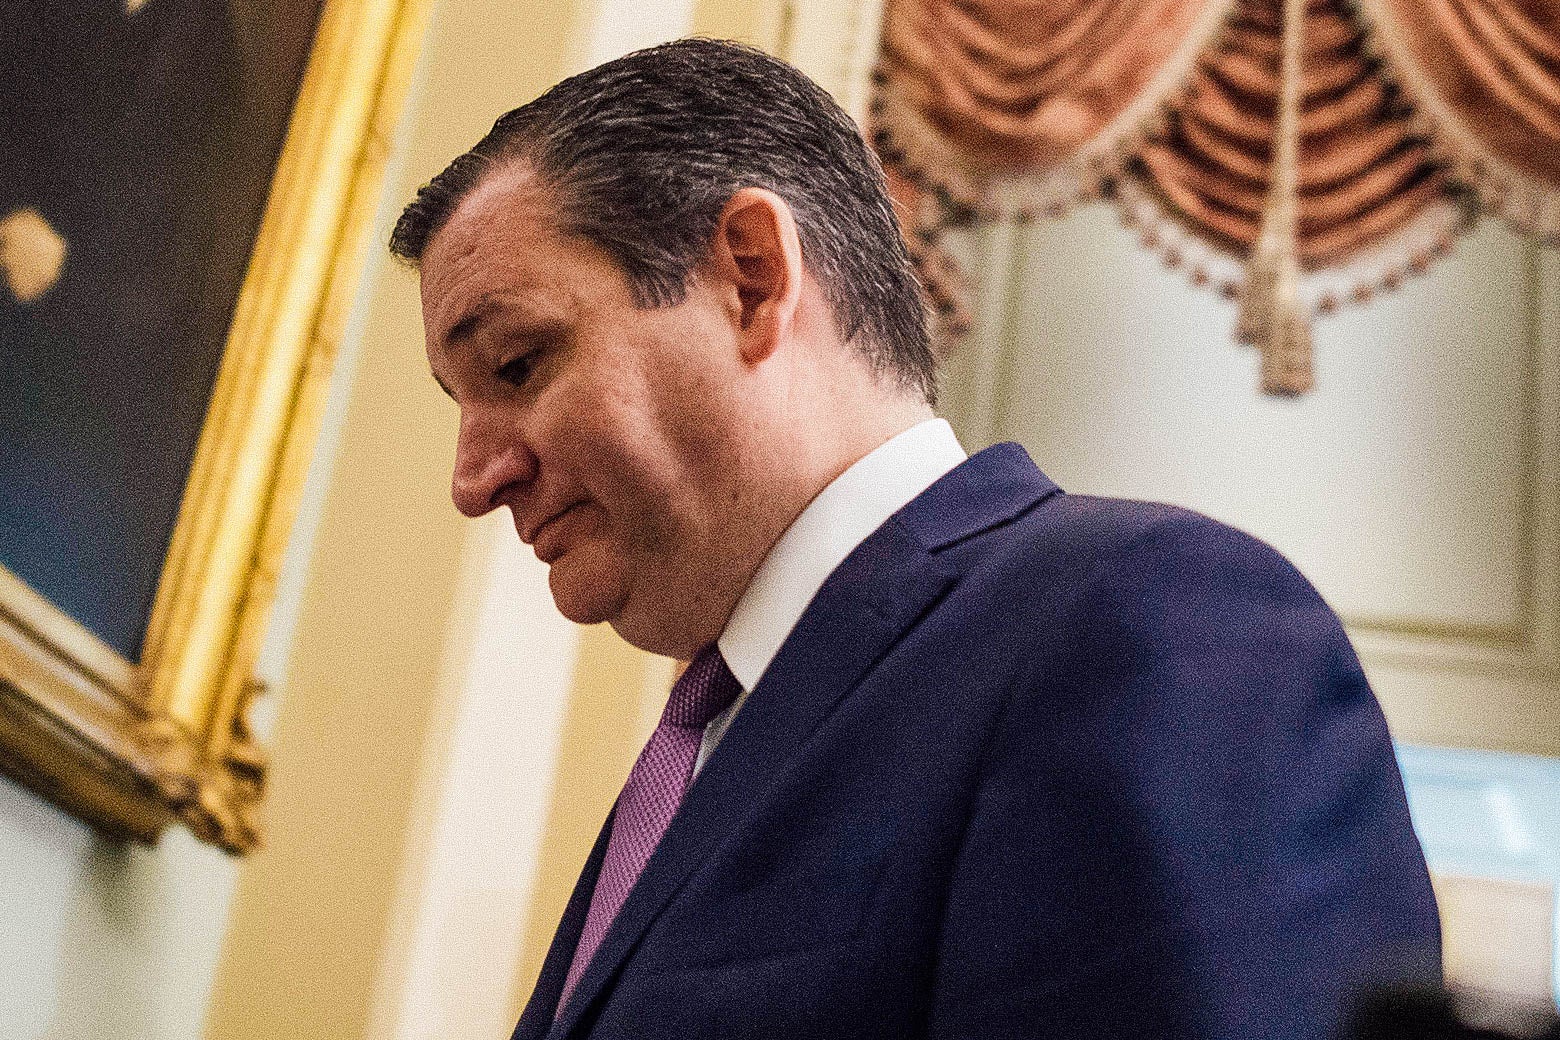 Senator Ted Cruz looks down after a working lunch in Washington, D.C.